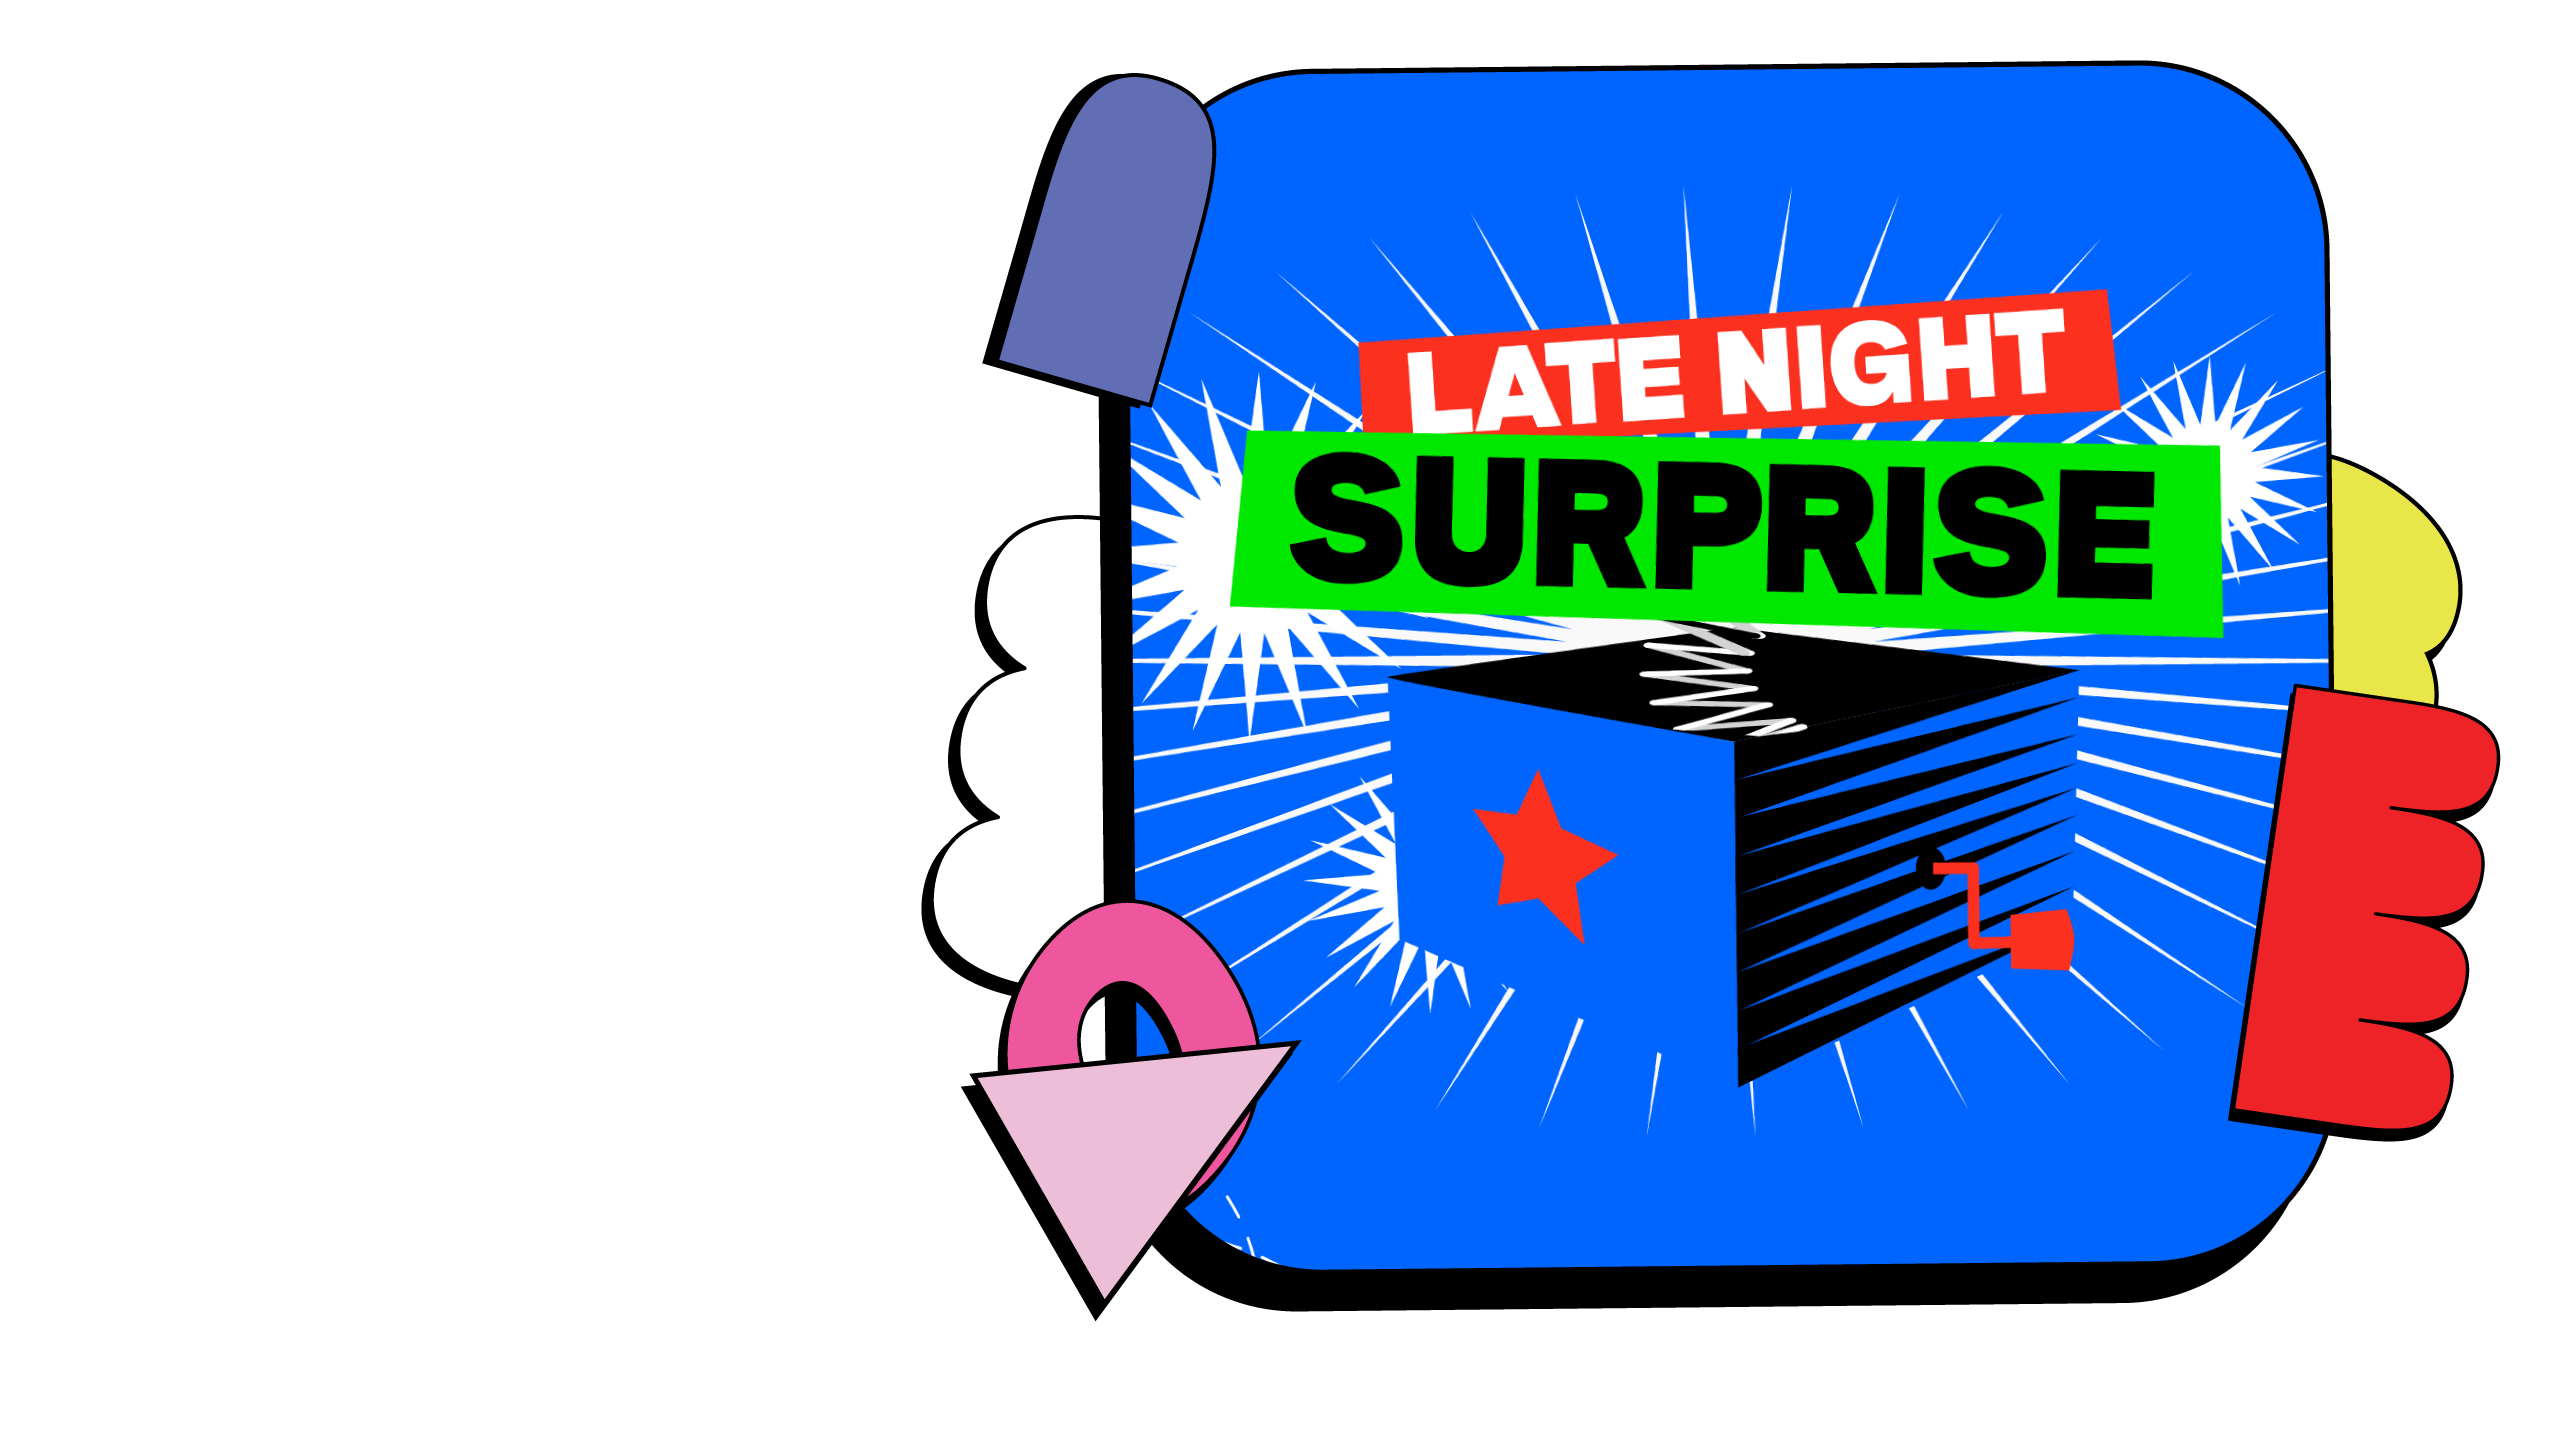 Promotional image for Late Night Surprise